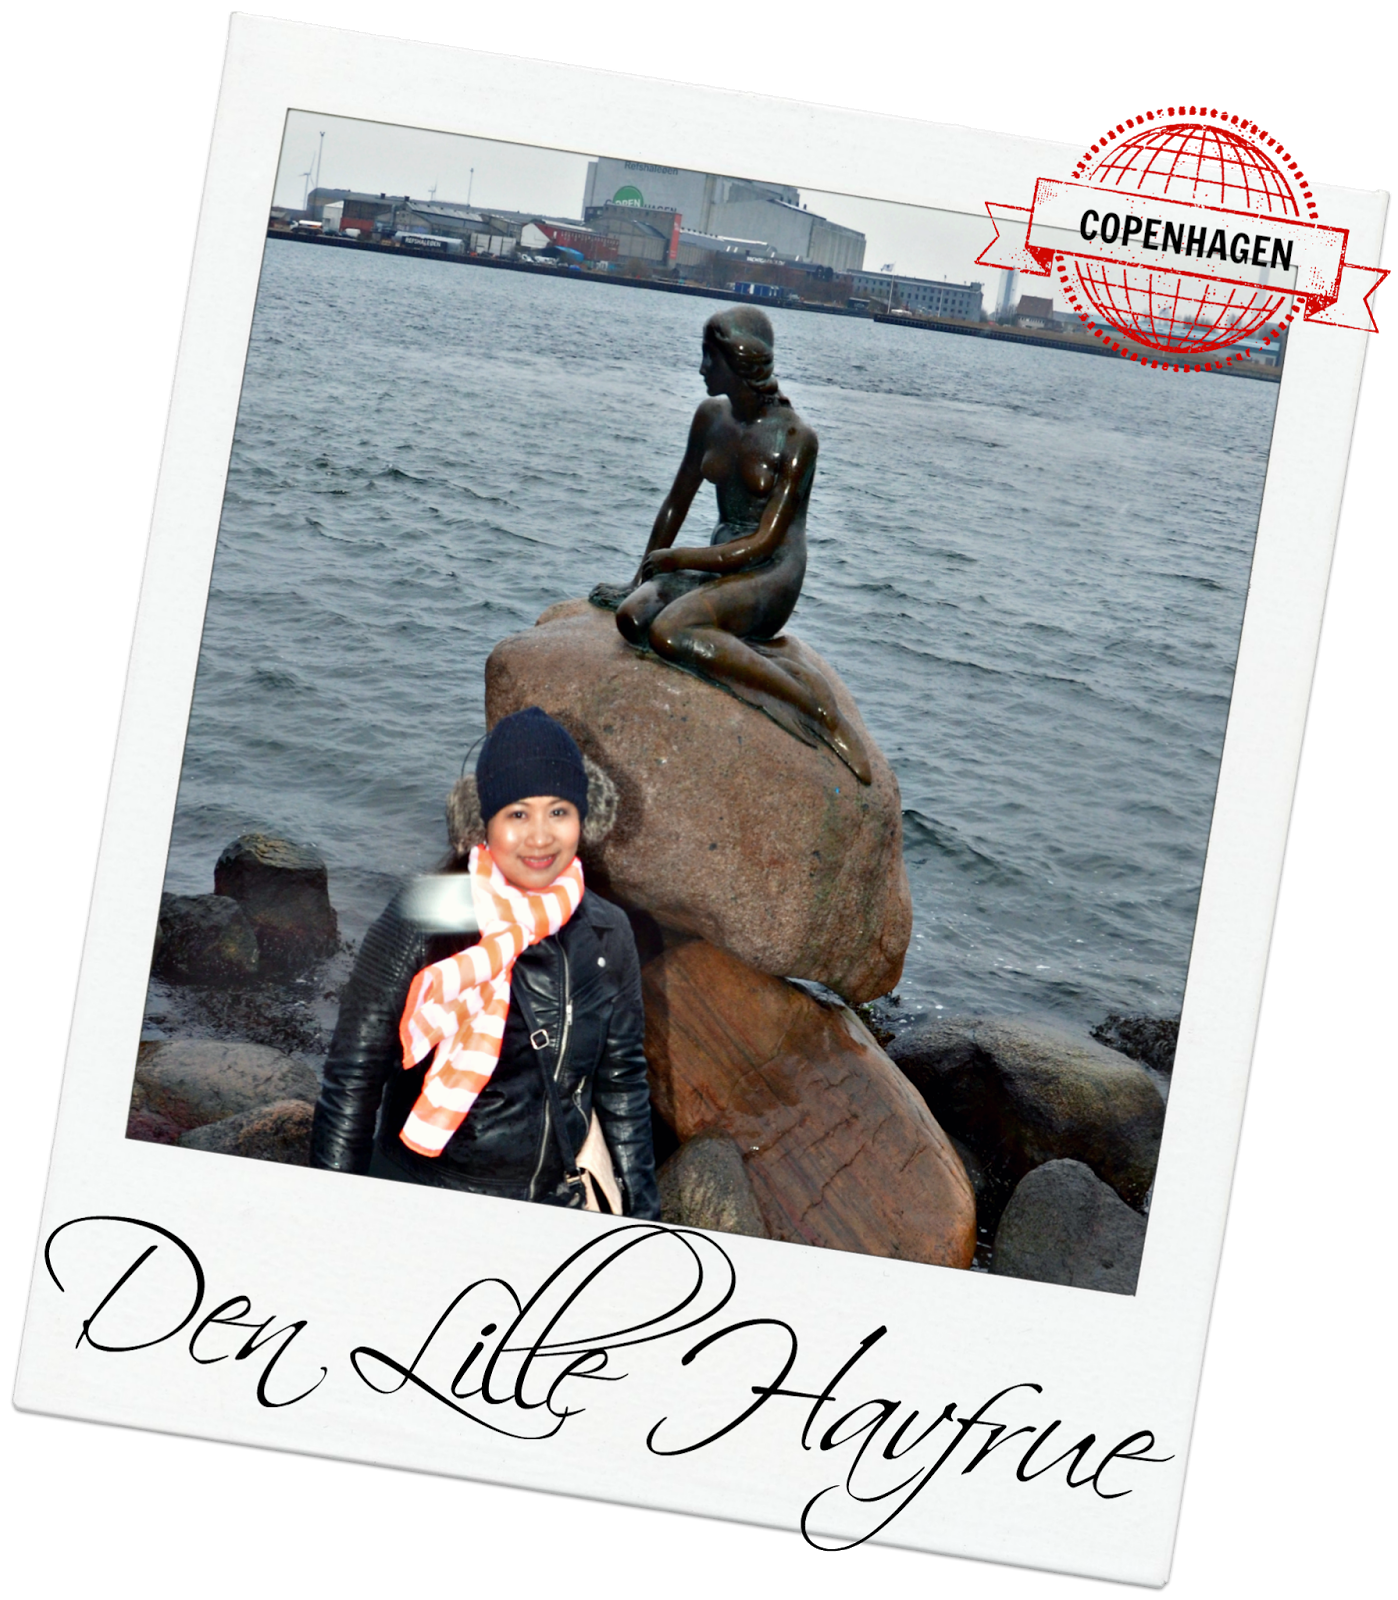 DENMARK DIARIES 5: DEN LILLE HAVFRUE - A Day In Life Of This Miss